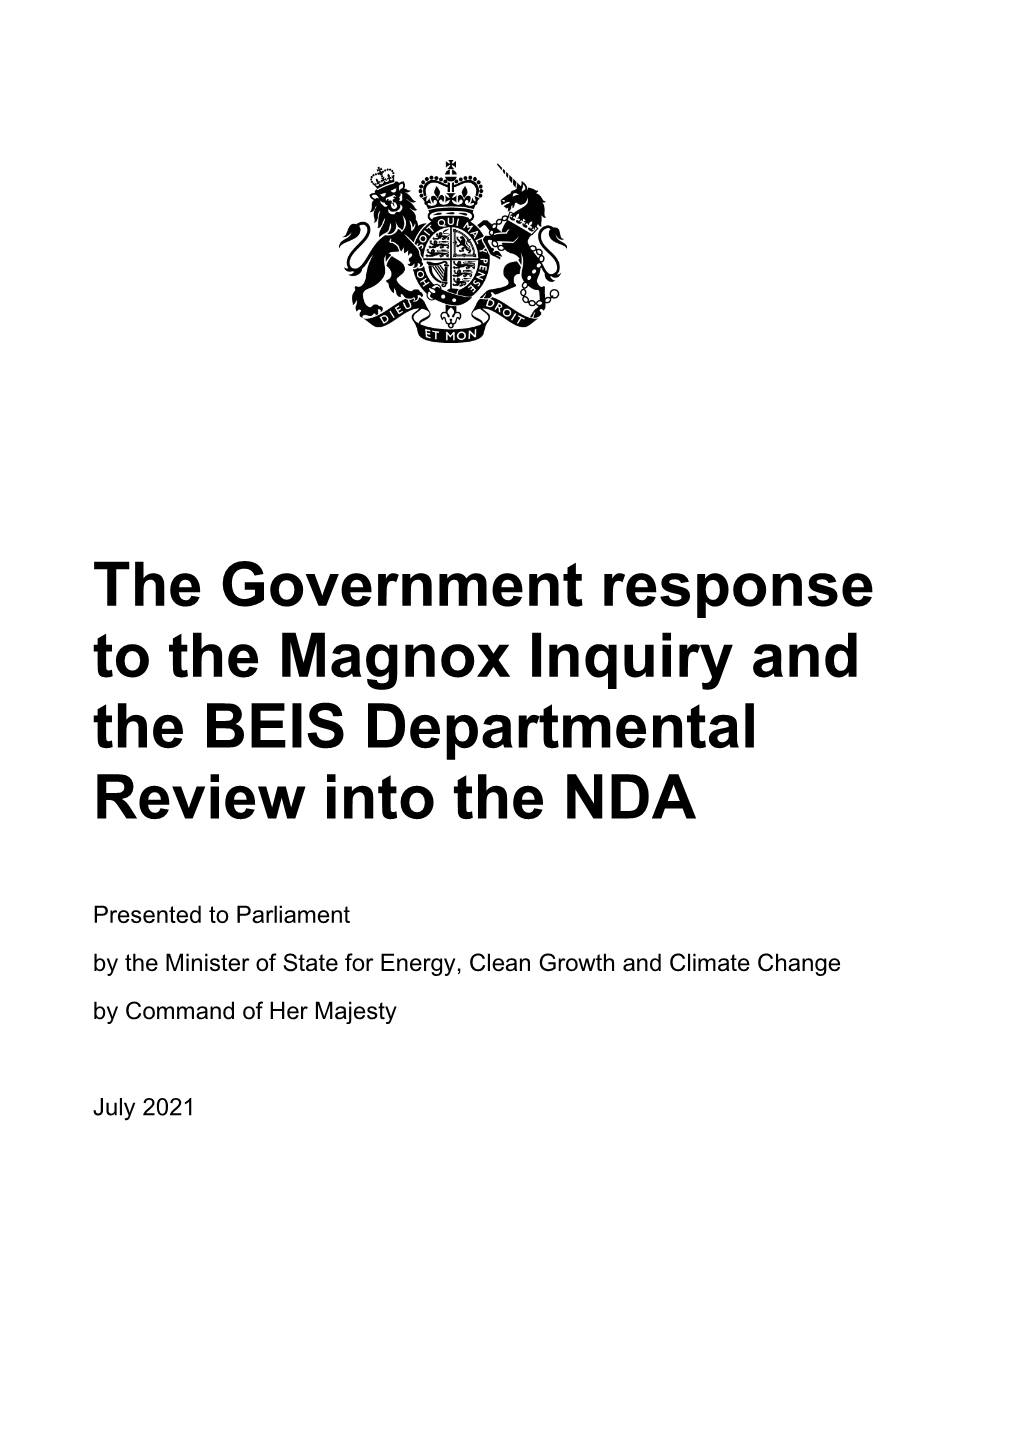 The Government Response to the Magnox Inquiry and the BEIS Departmental Review Into the NDA